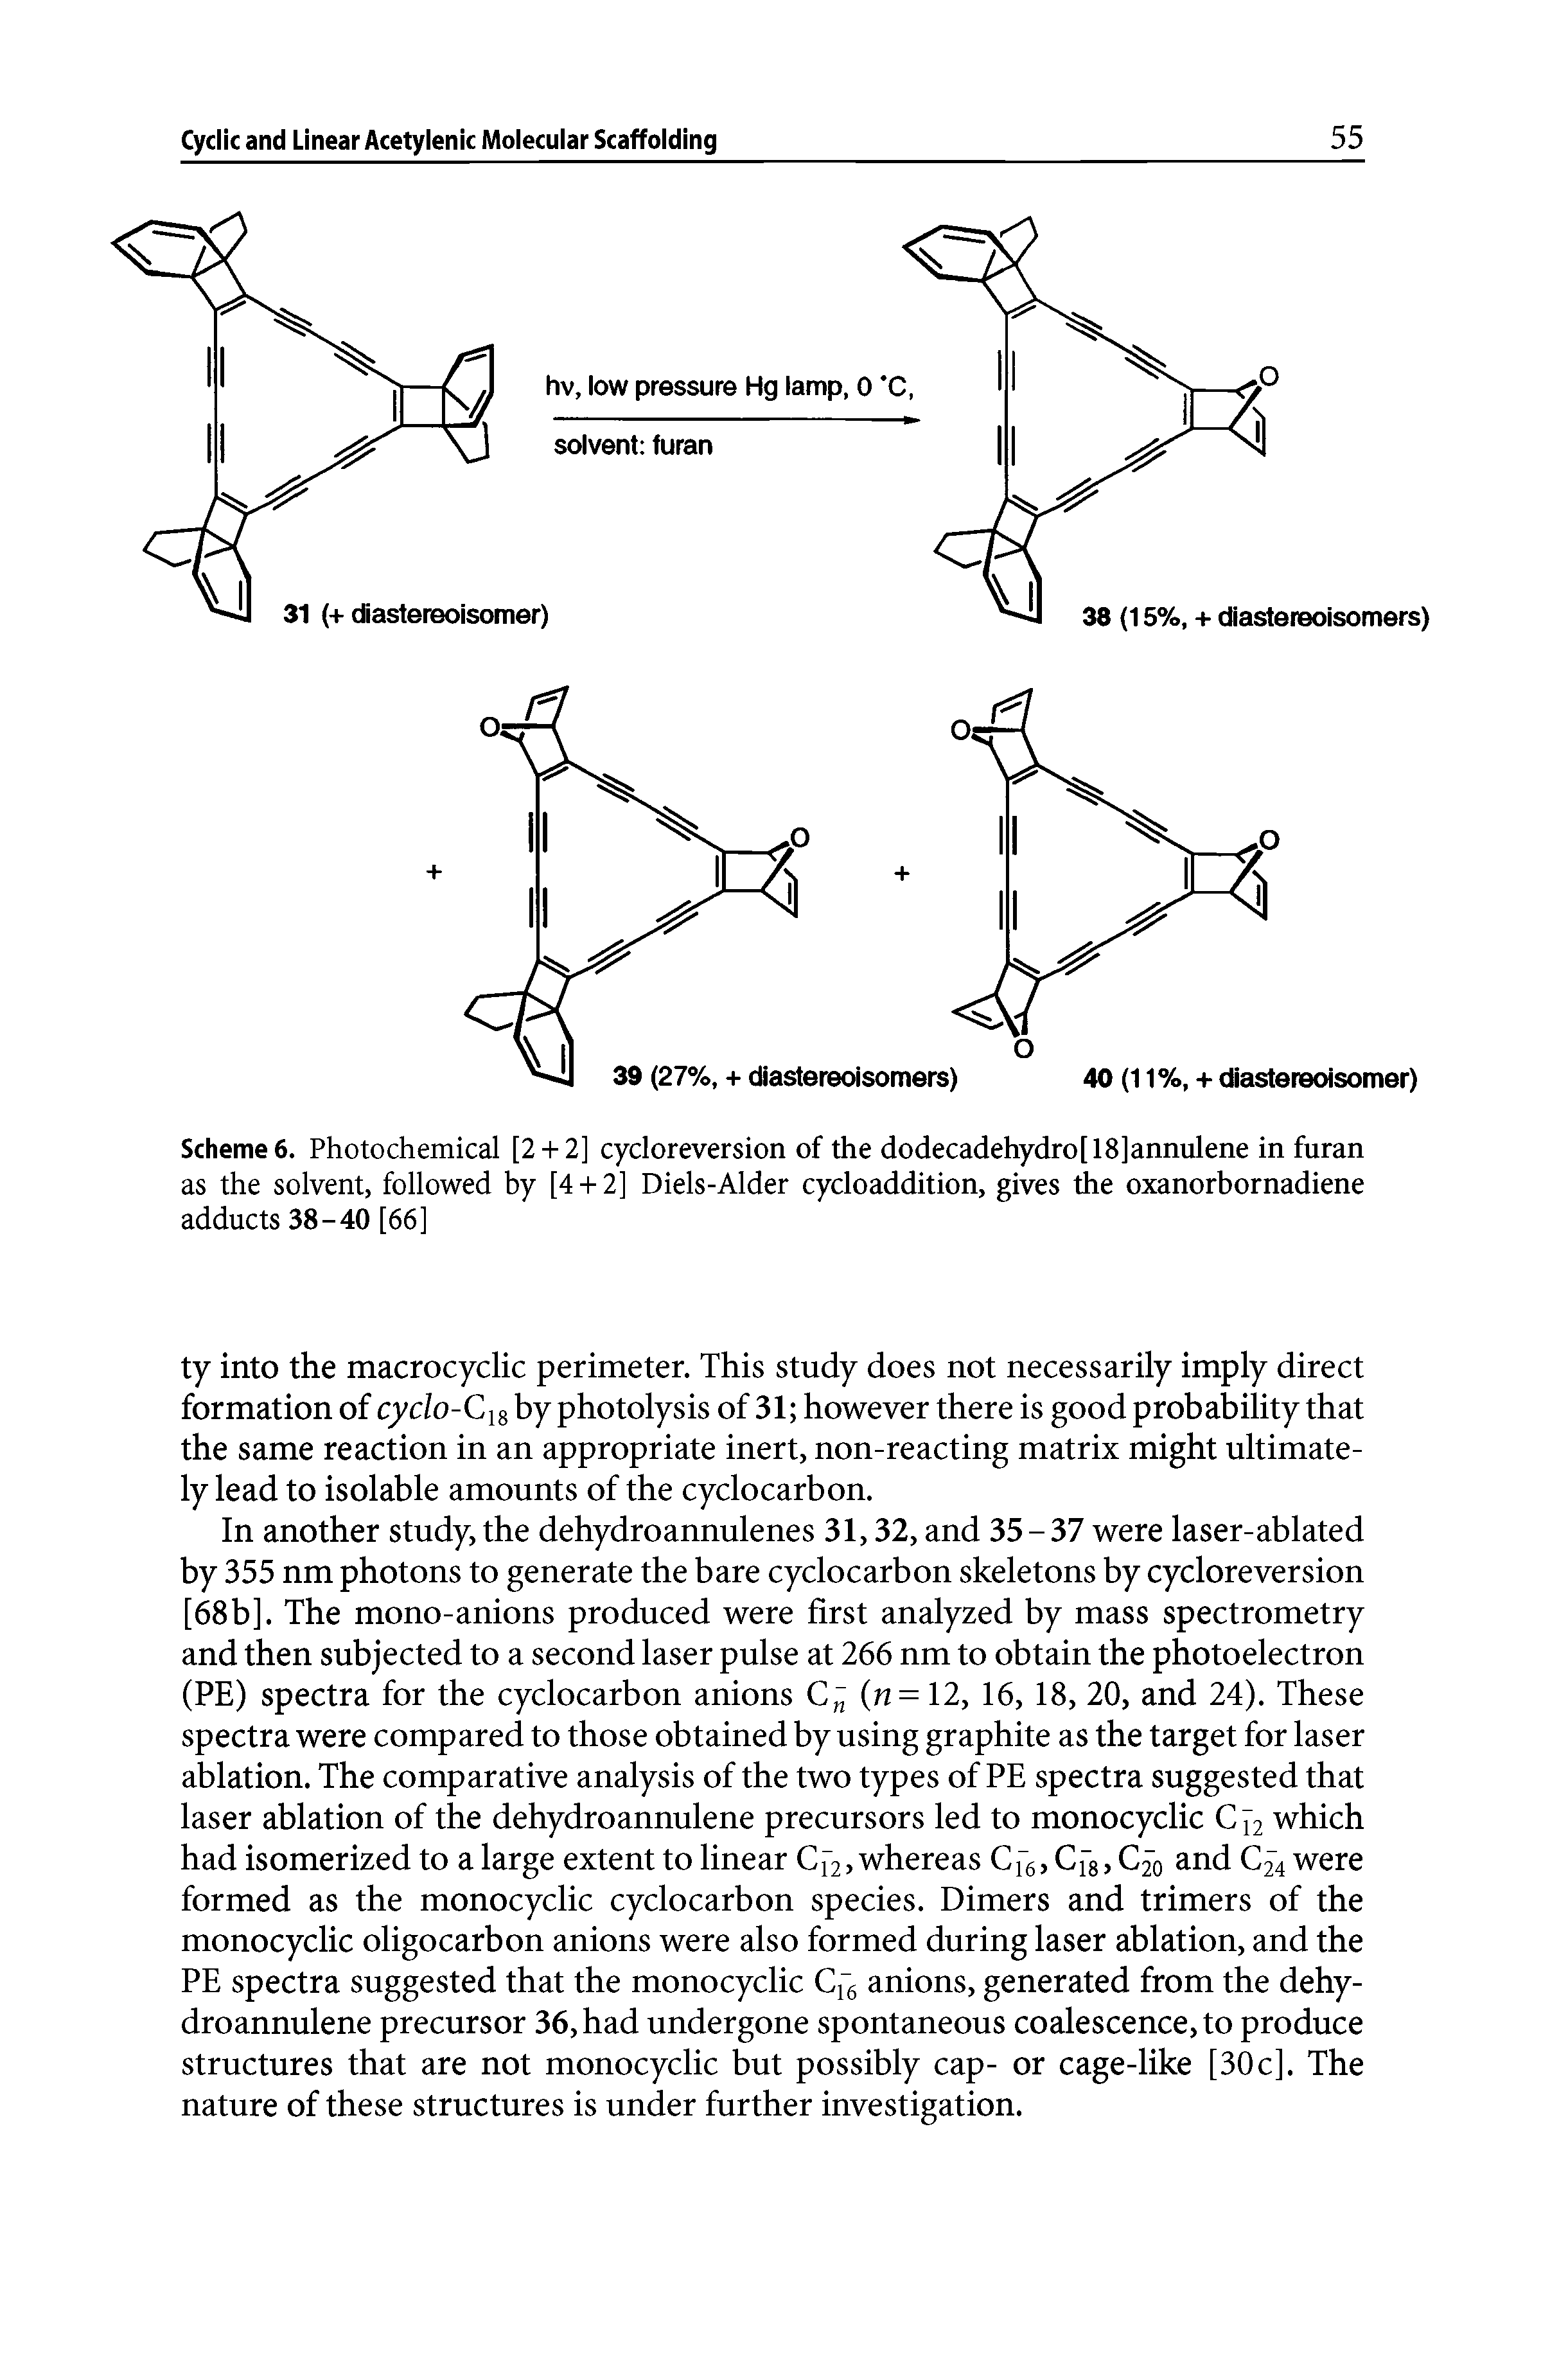 Scheme 6. Photochemical [2 + 2] cycloreversion of the dodecadehydro[18]annulene in furan as the solvent, followed by [4 + 2] Diels-Alder cycloaddition, gives the oxanorbornadiene adducts 38-40 [66]...